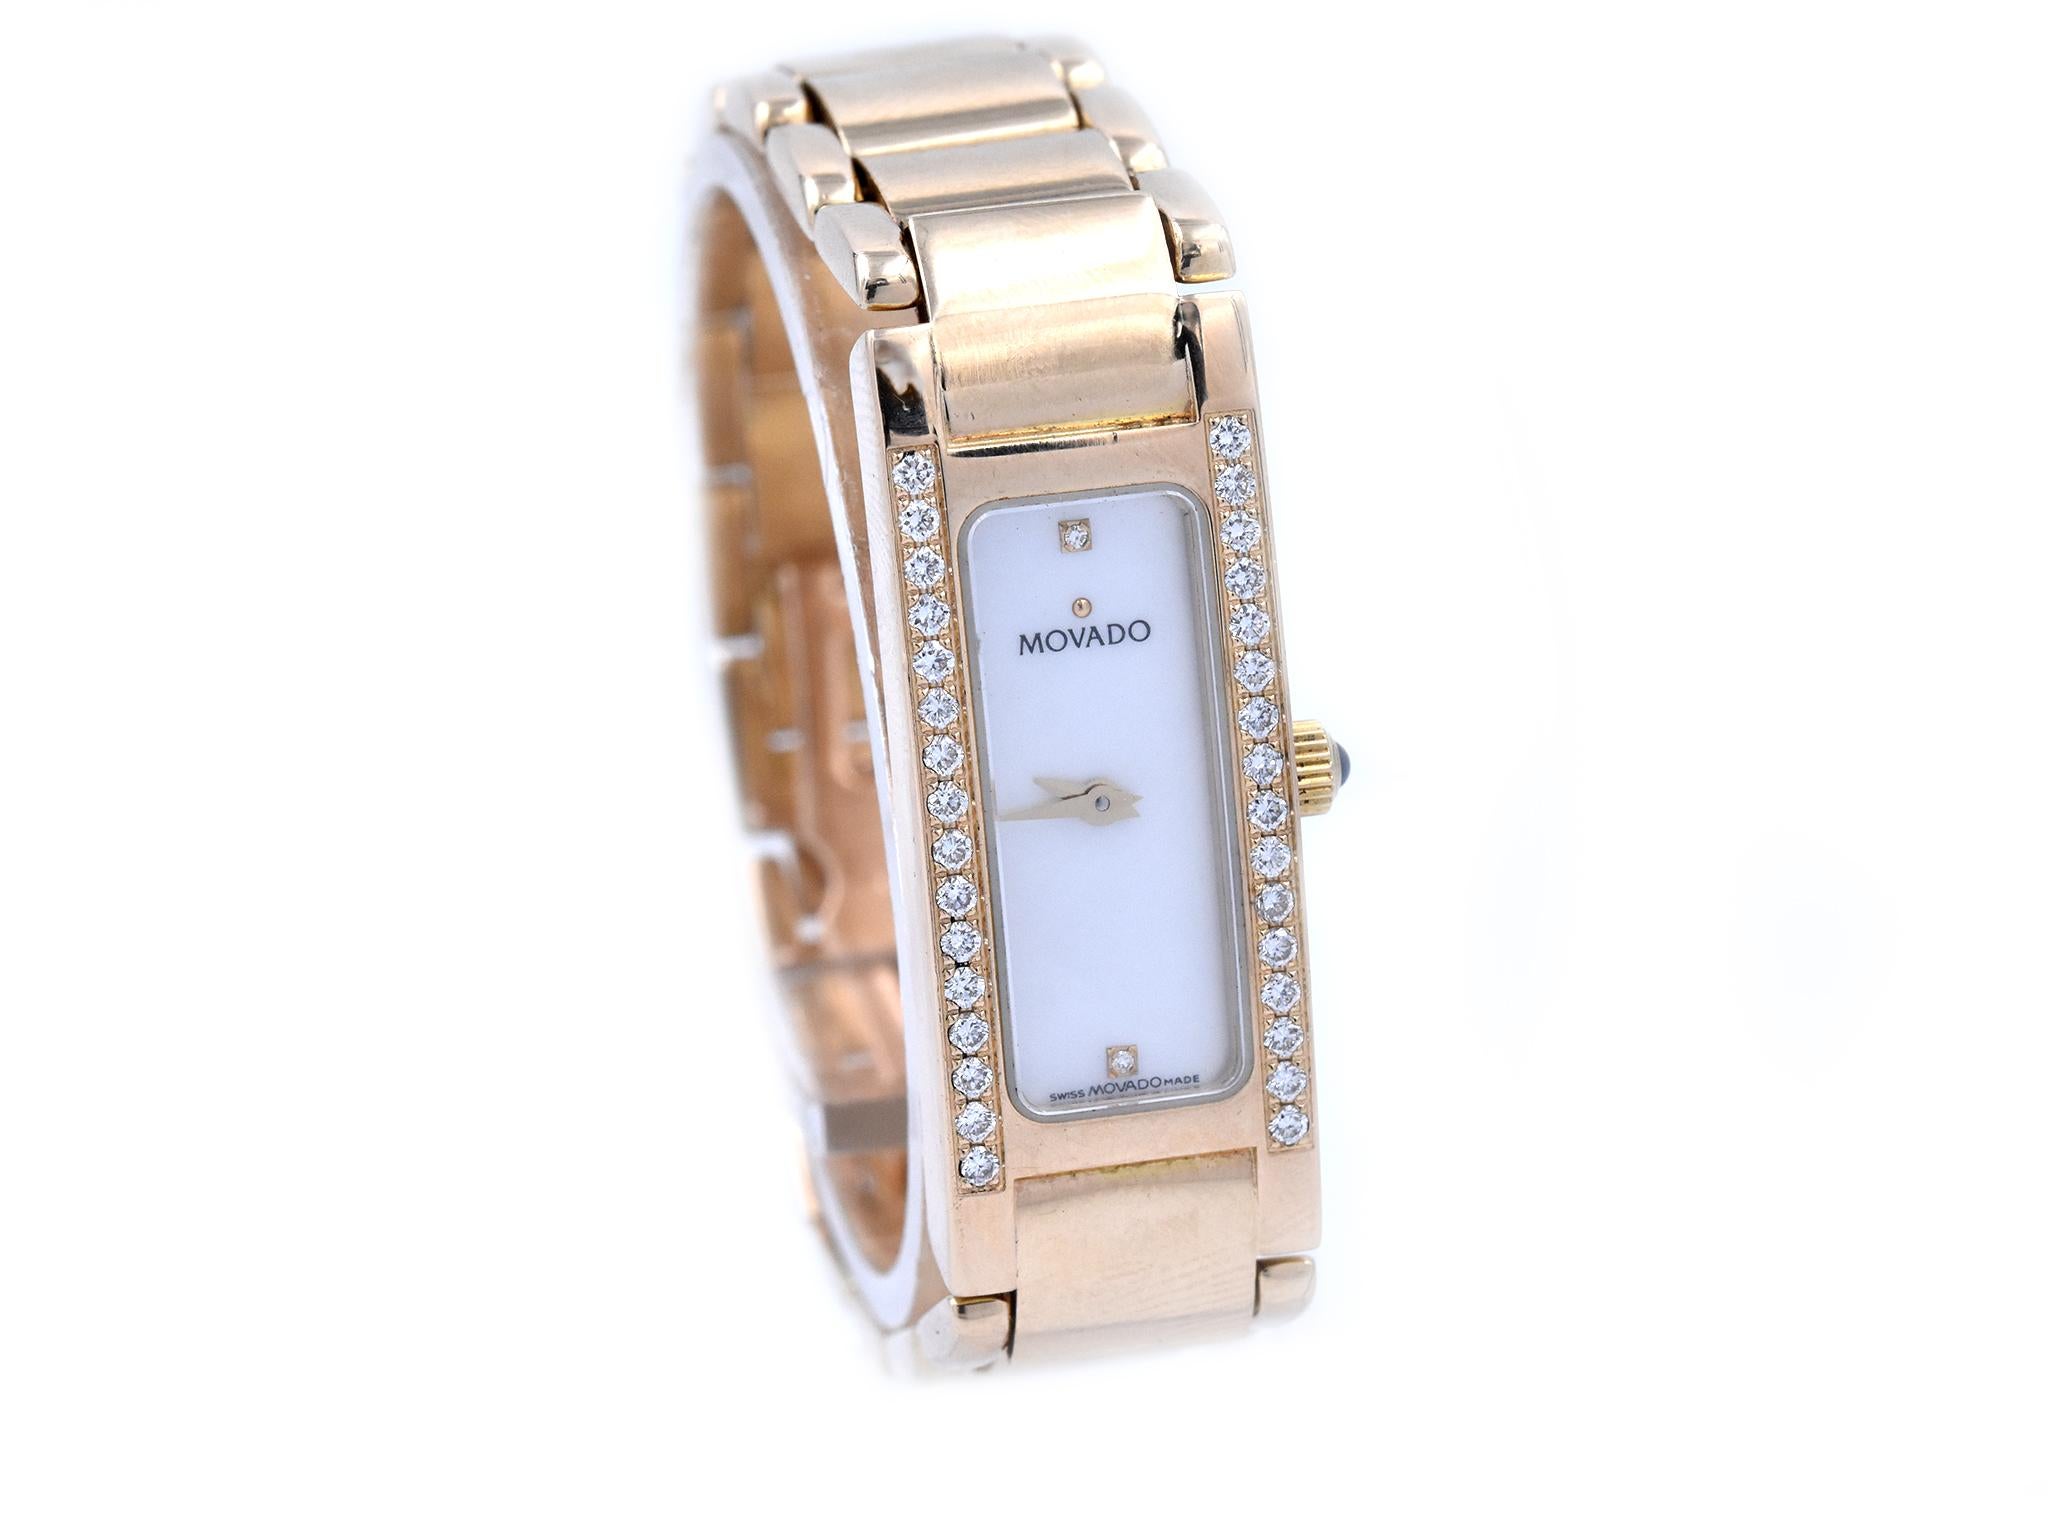 Movement: quartz
Function: hours, minutes
Case: 13.65mm x 33.40mm yellow gold case, diamond bezel = 0.35cttw, push/pull crown, water resistant
Dial: mother-of-pearl dial with gold hands, diamond hour markers at 12 and 6 o’clock
Bracelet: 14k yellow